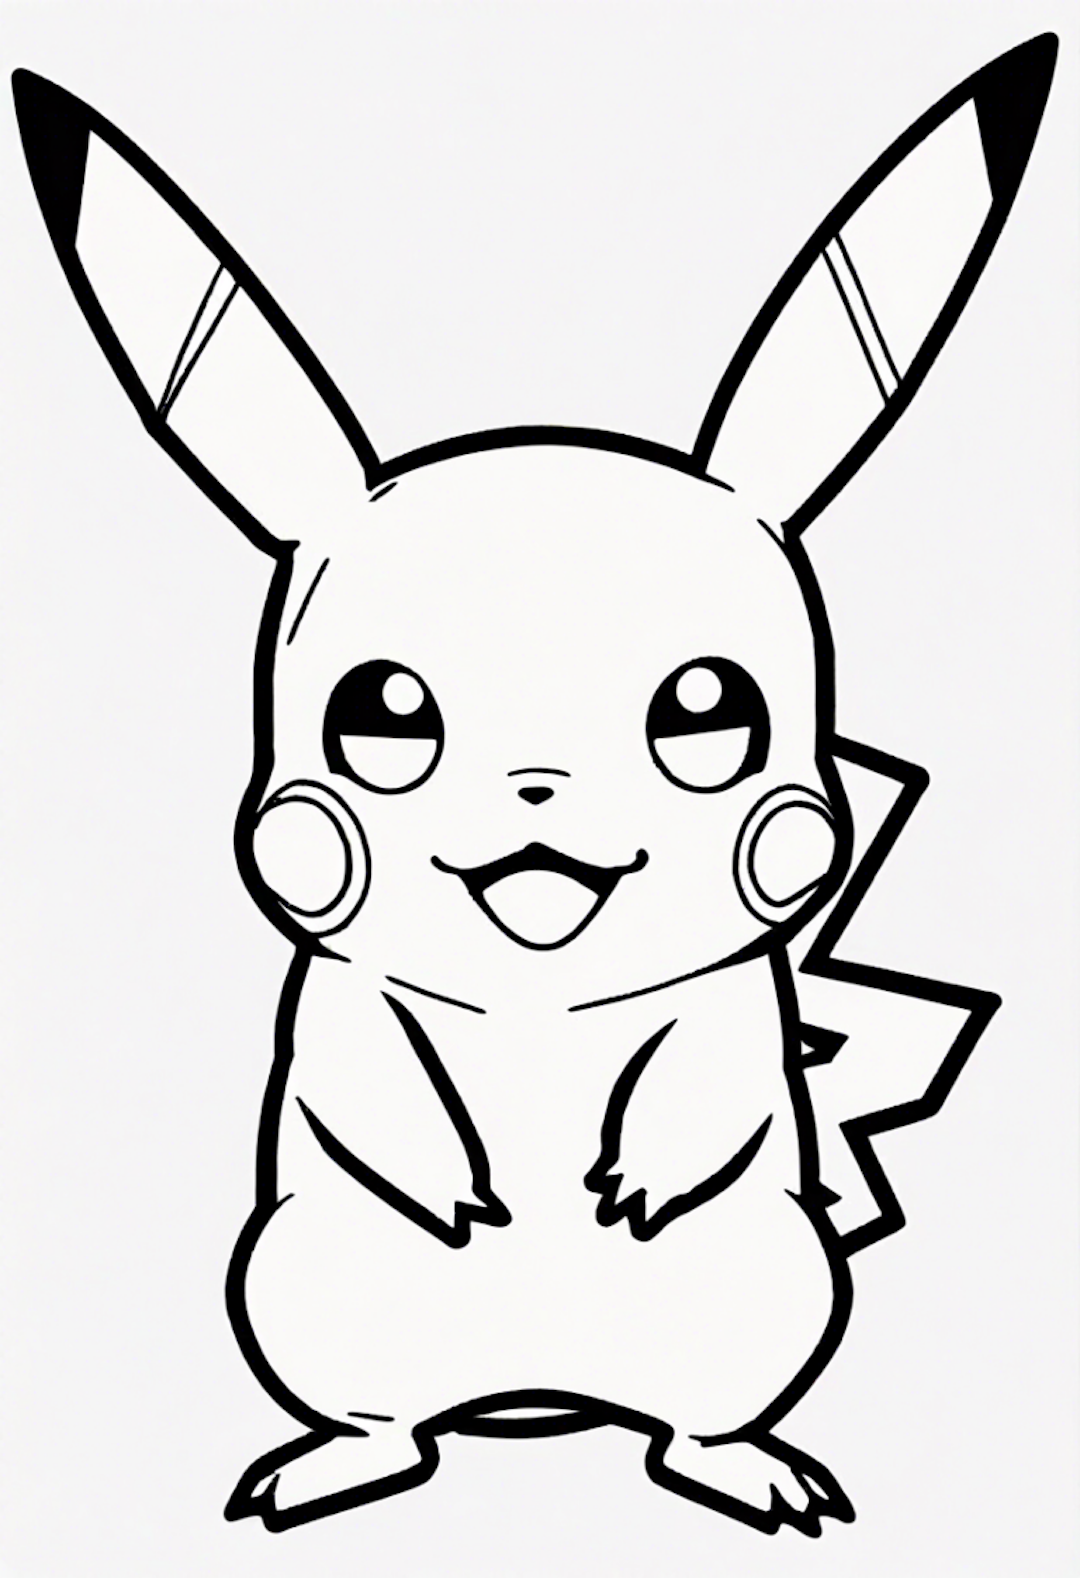 Pikachu Coloring Fun: Electric Adventure! coloring pages